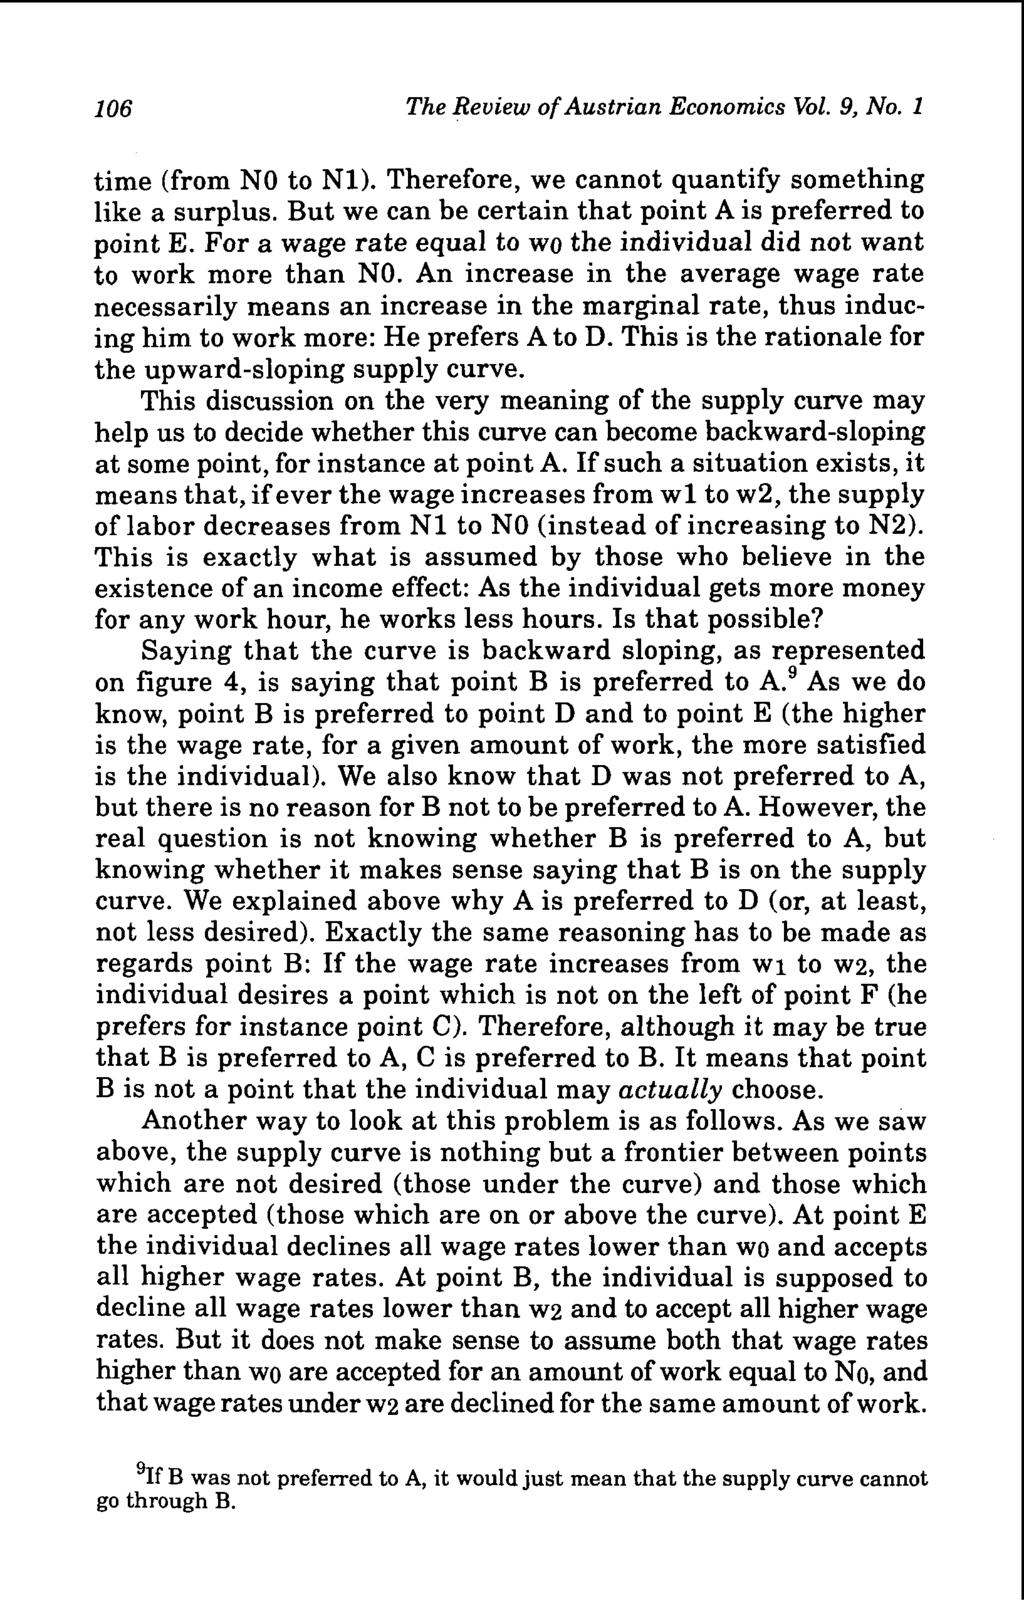 106 The Review of Austrian Economics Vol. 9, No. 1 time (from NO to Nl). Therefore, we cannot quantify something like a surplus. But we can be certain that point A is preferred to point E.